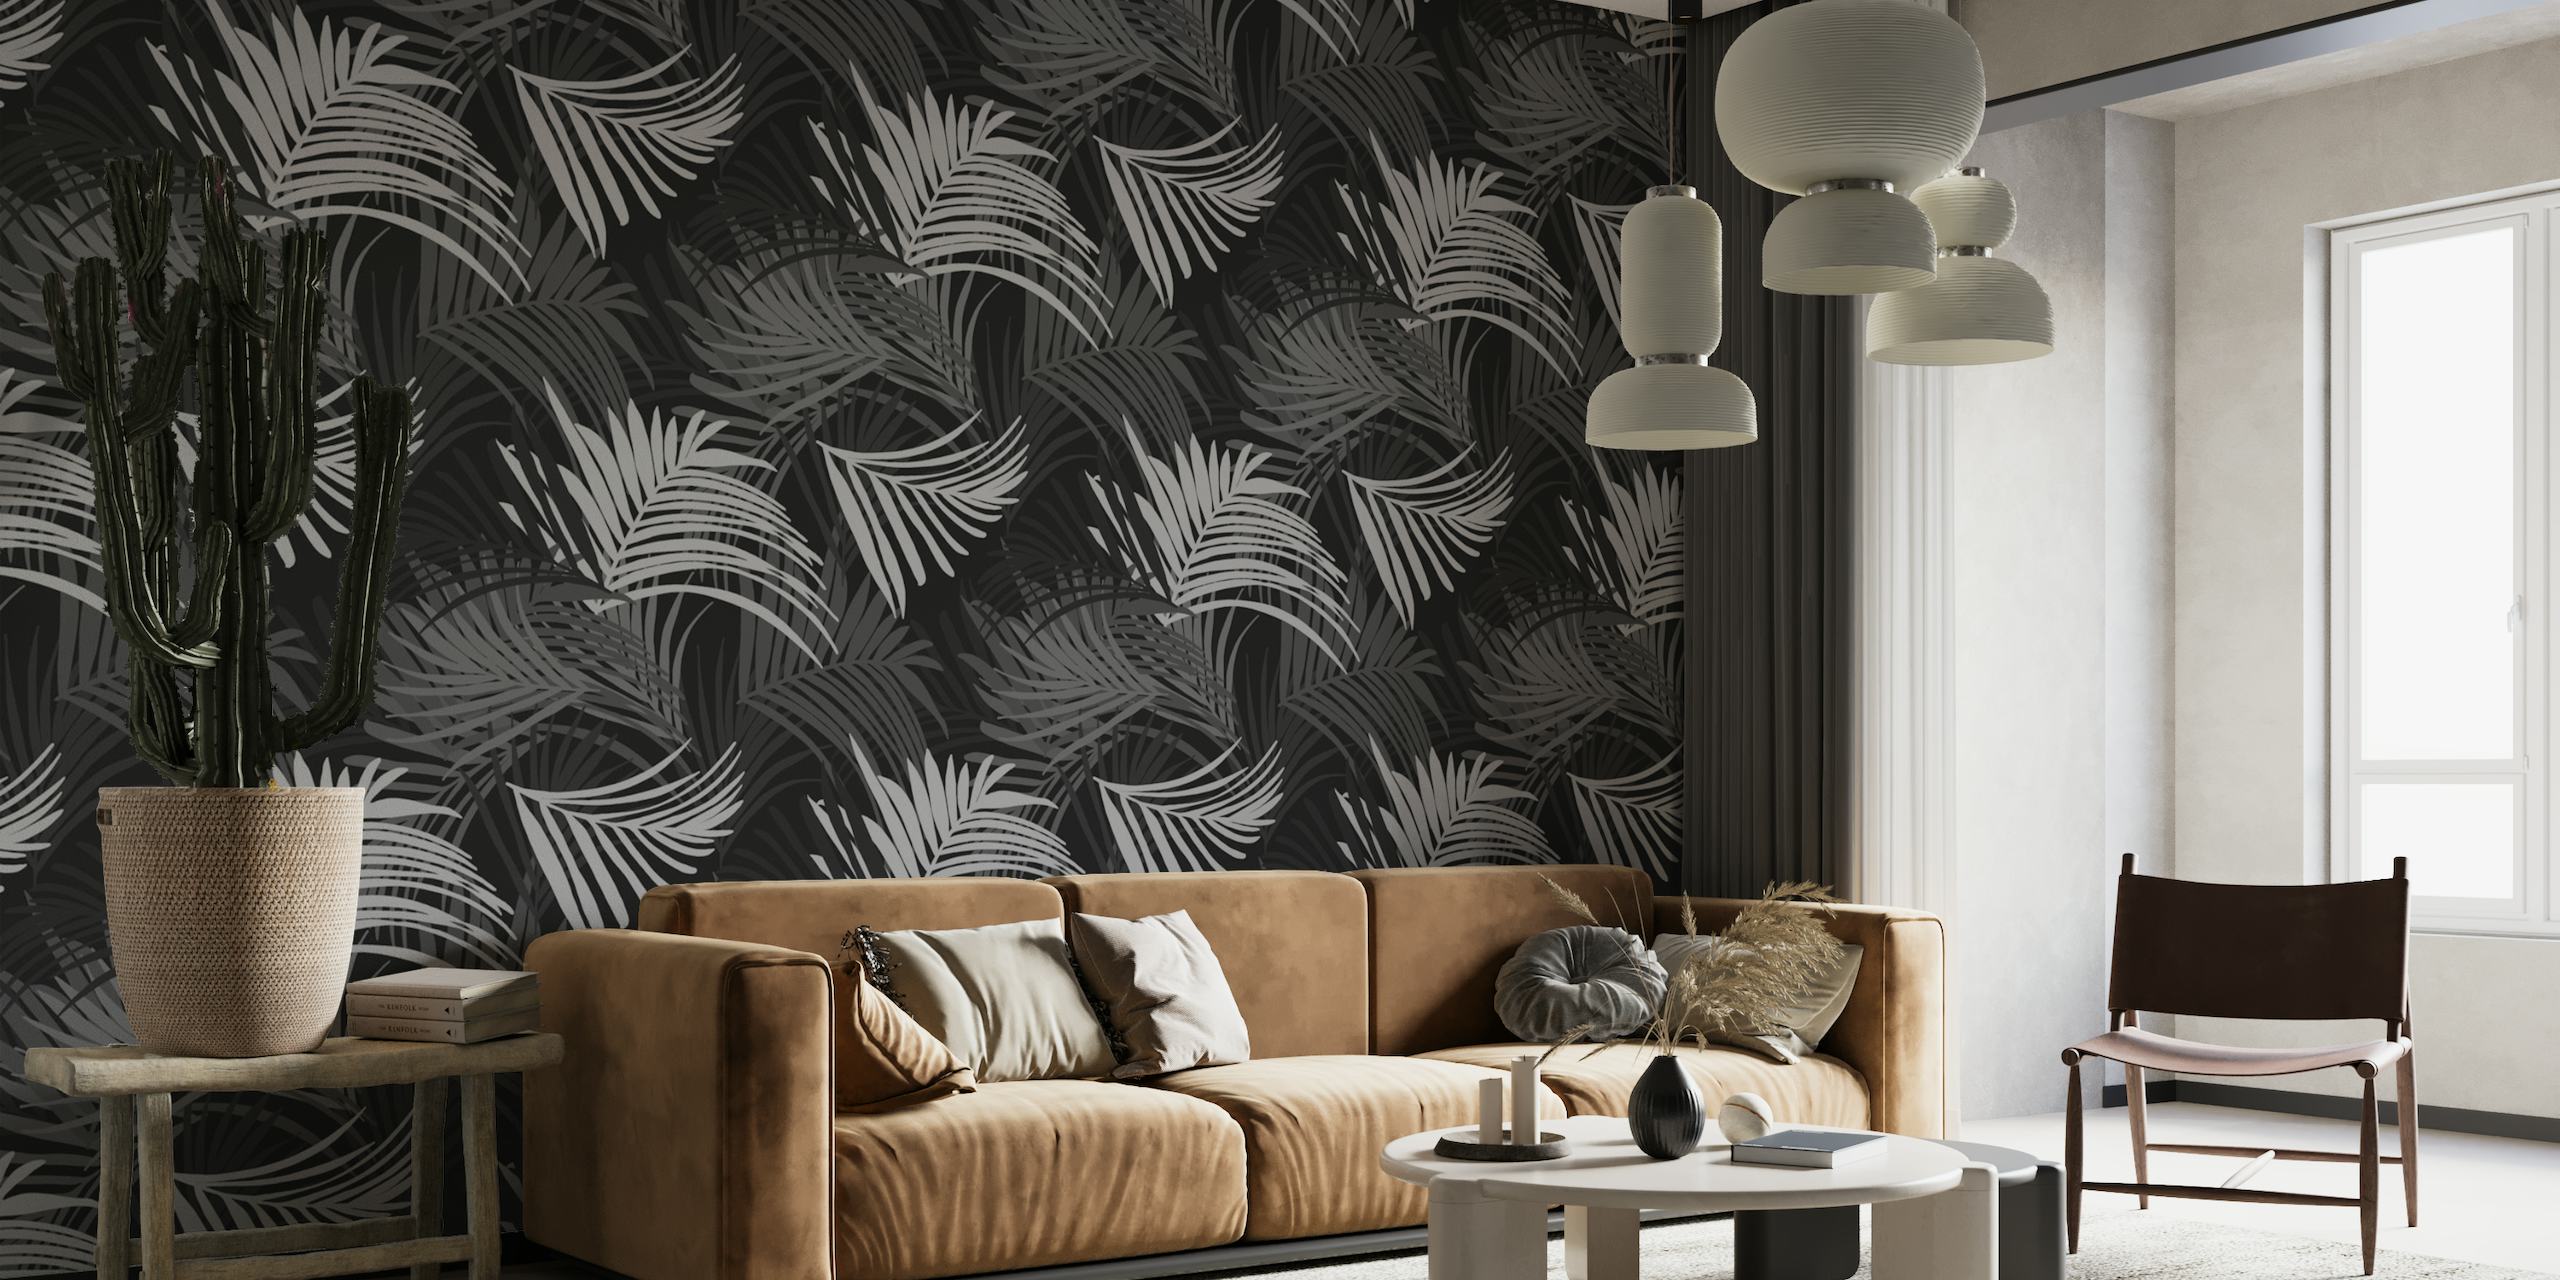 Black and white tropical palm leaf pattern wall mural, perfect for creating a serene jungle theme.